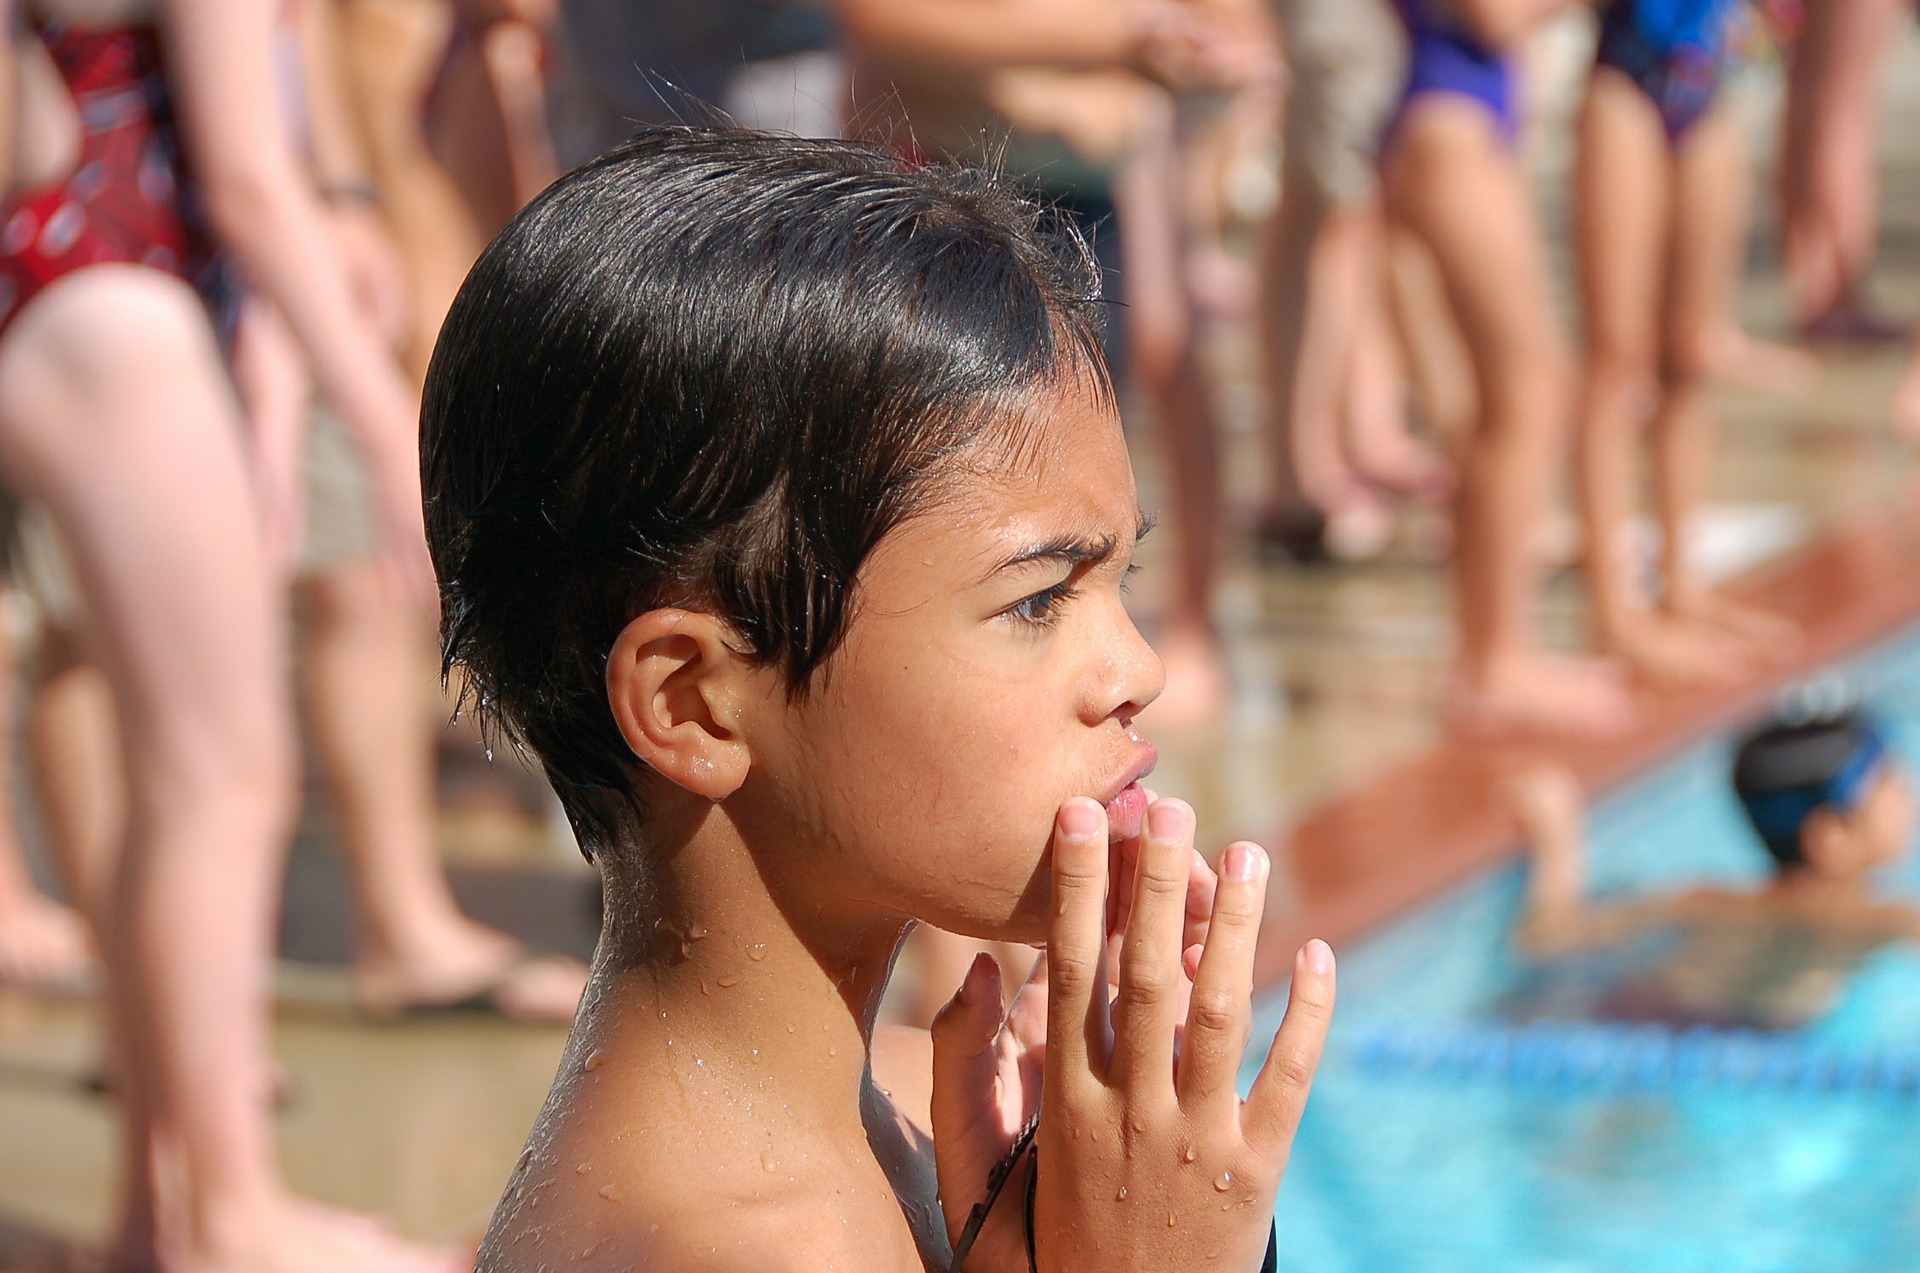 Boy at a swimming pool with a look of reflection on his face.